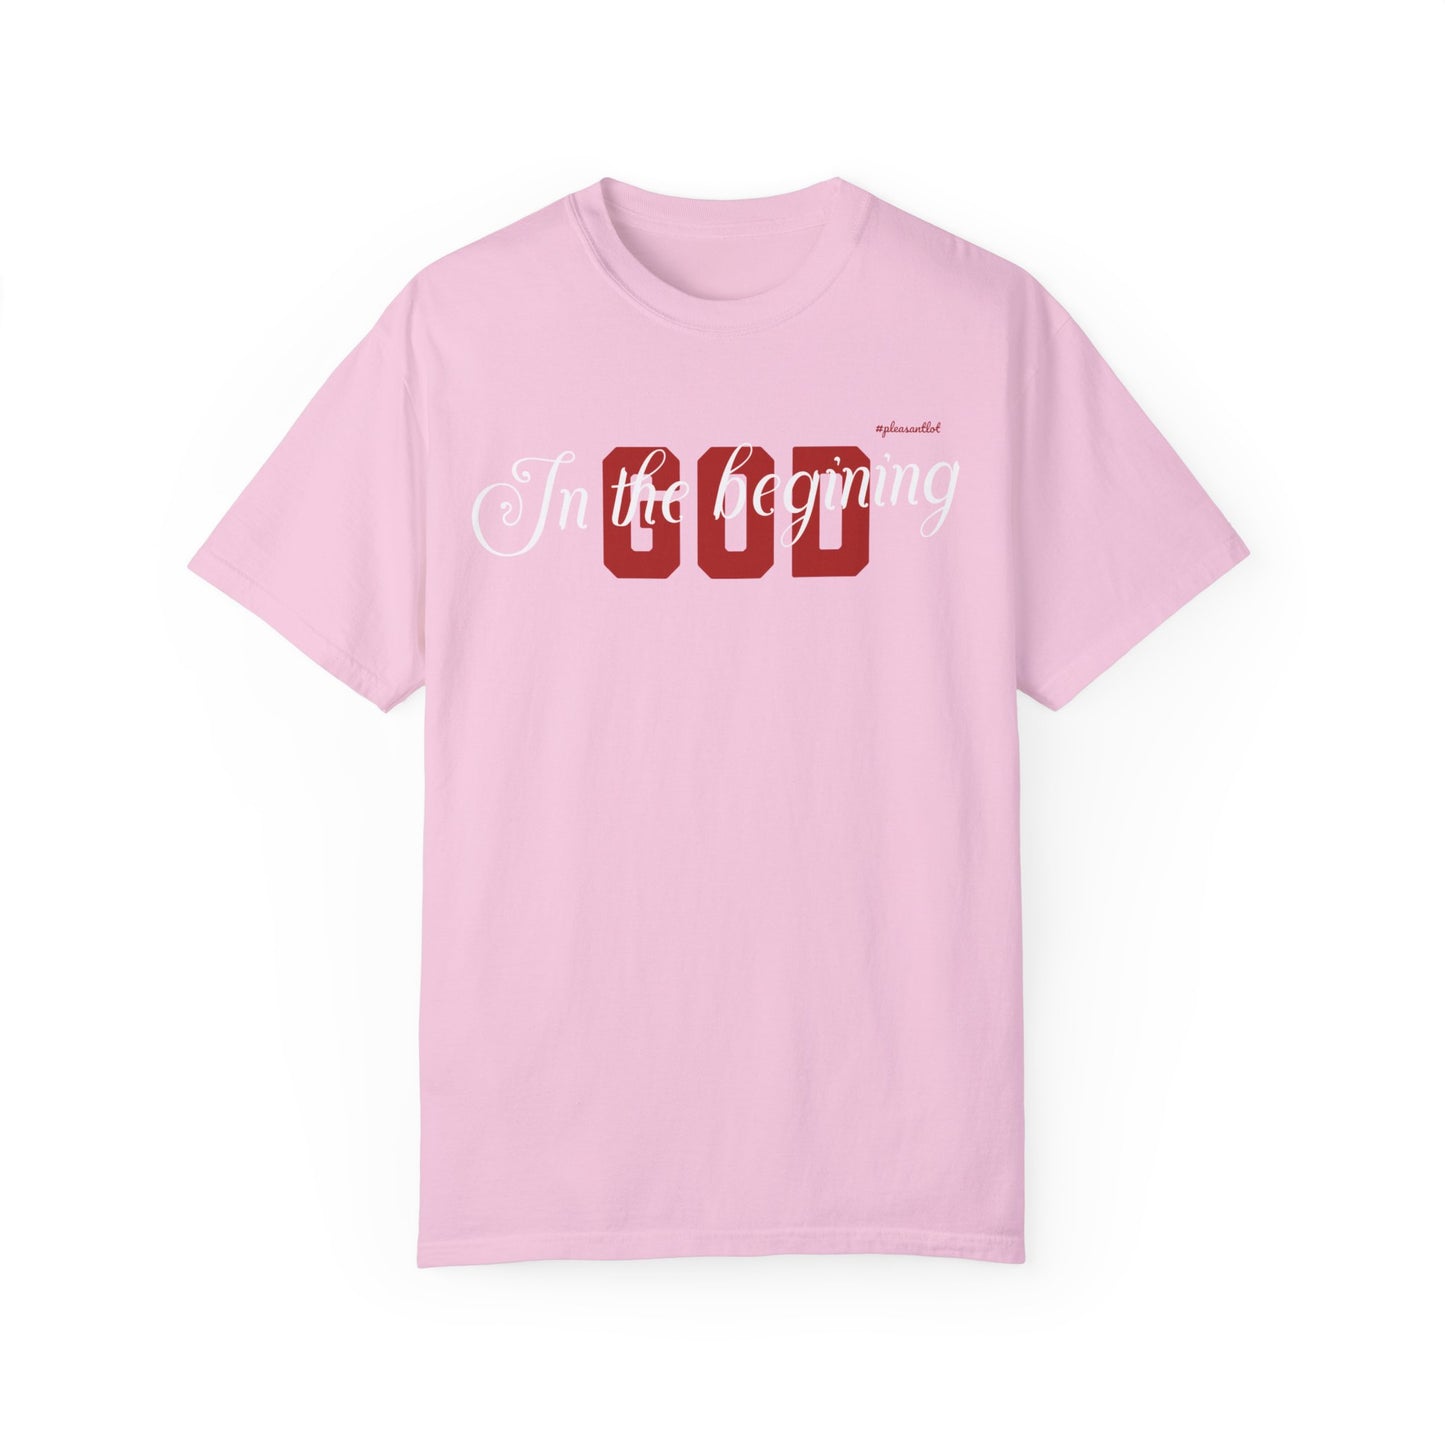 Unisex Garment-Dyed T-shirt(In The Begining, God)